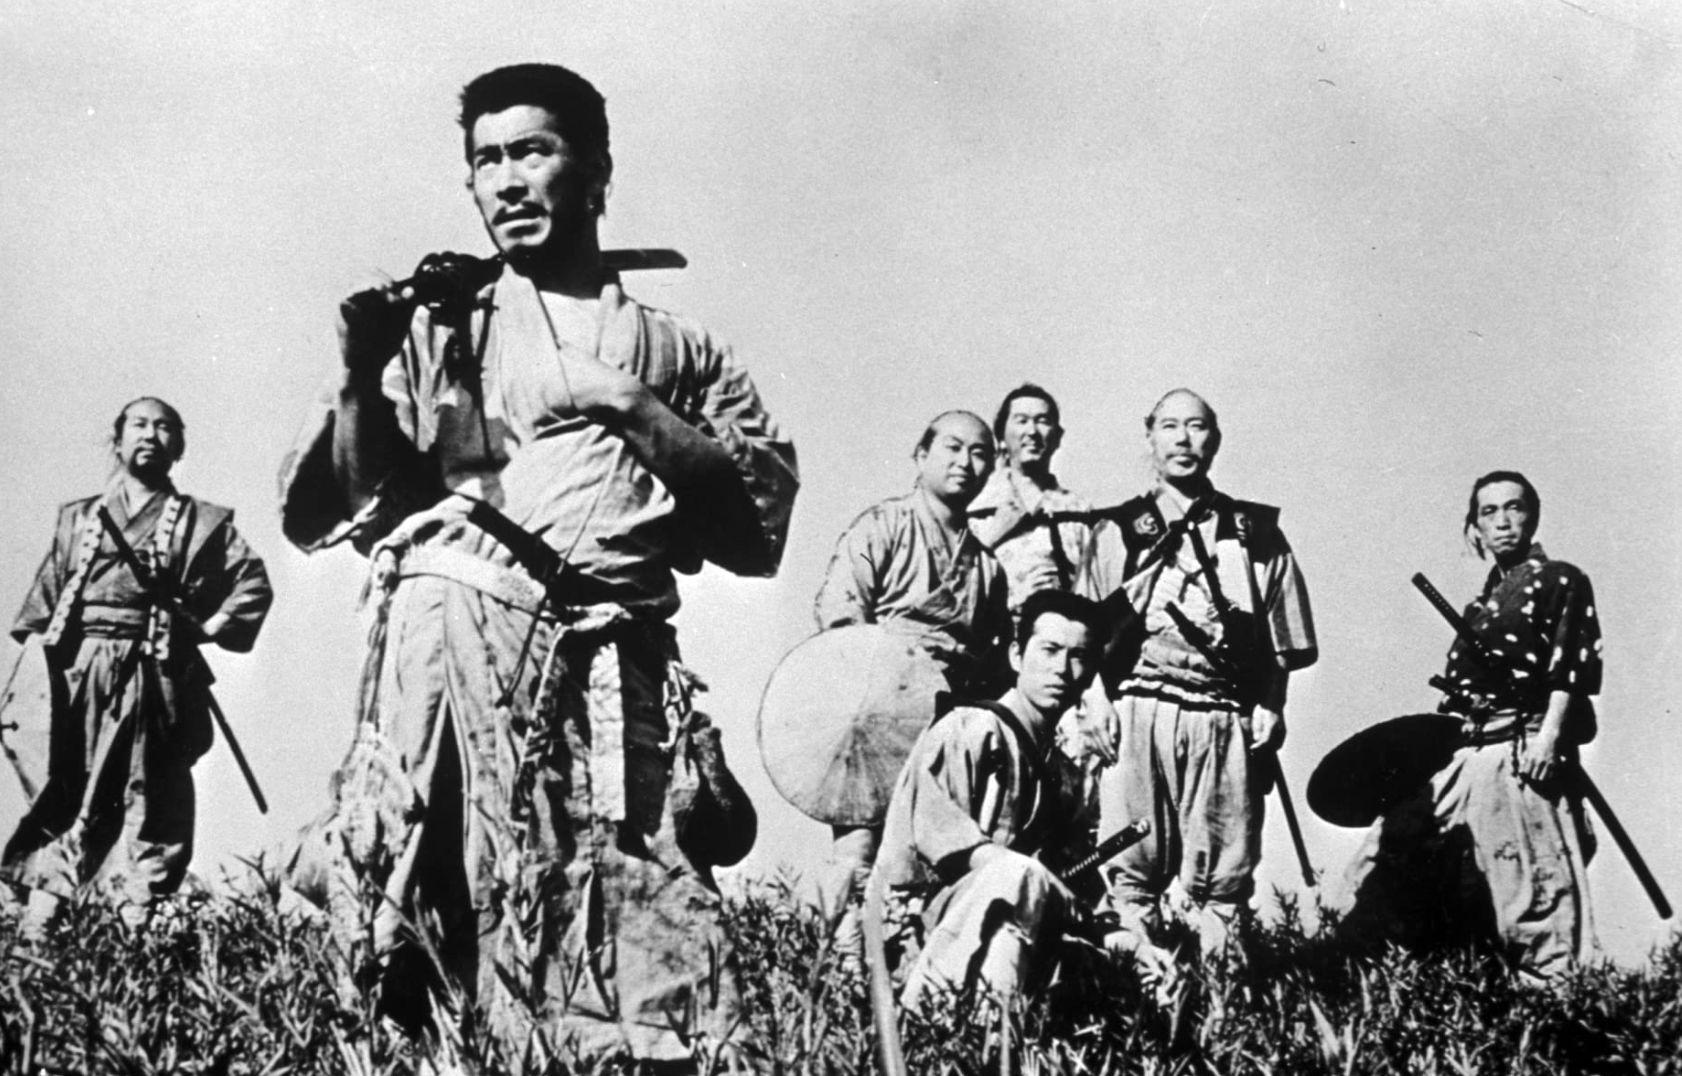 <p><b>Rotten Tomatoes Score</b>: 100%</p><p>Seven Samurai is a timeless masterpiece of world cinema that has captivated audiences for decades. Directed by the legendary filmmaker Akira Kurosawa, the film tells the story of a group of samurai who come together to protect a village from marauding bandits. The film is renowned for its masterful storytelling, complex characters, and epic battle sequences that still leave audiences in awe to this day.</p><p>The film's expertly crafted screenplay, innovative cinematography, and nuanced performances have solidified its place in cinematic history, and its influence can be seen in countless films that have followed in its wake.</p><p><b>Critics said</b>:  “Arguably Akira Kurosawa's masterpiece, The Seven Samurai is an epic adventure classic with an engrossing story, memorable characters, and stunning action sequences that make it one of the most influential films ever made.” <a href="https://www.rottentomatoes.com/m/seven_samurai_1956/reviews?intcmp=rt-what-to-know_read-critics-reviews">RT</a></p>